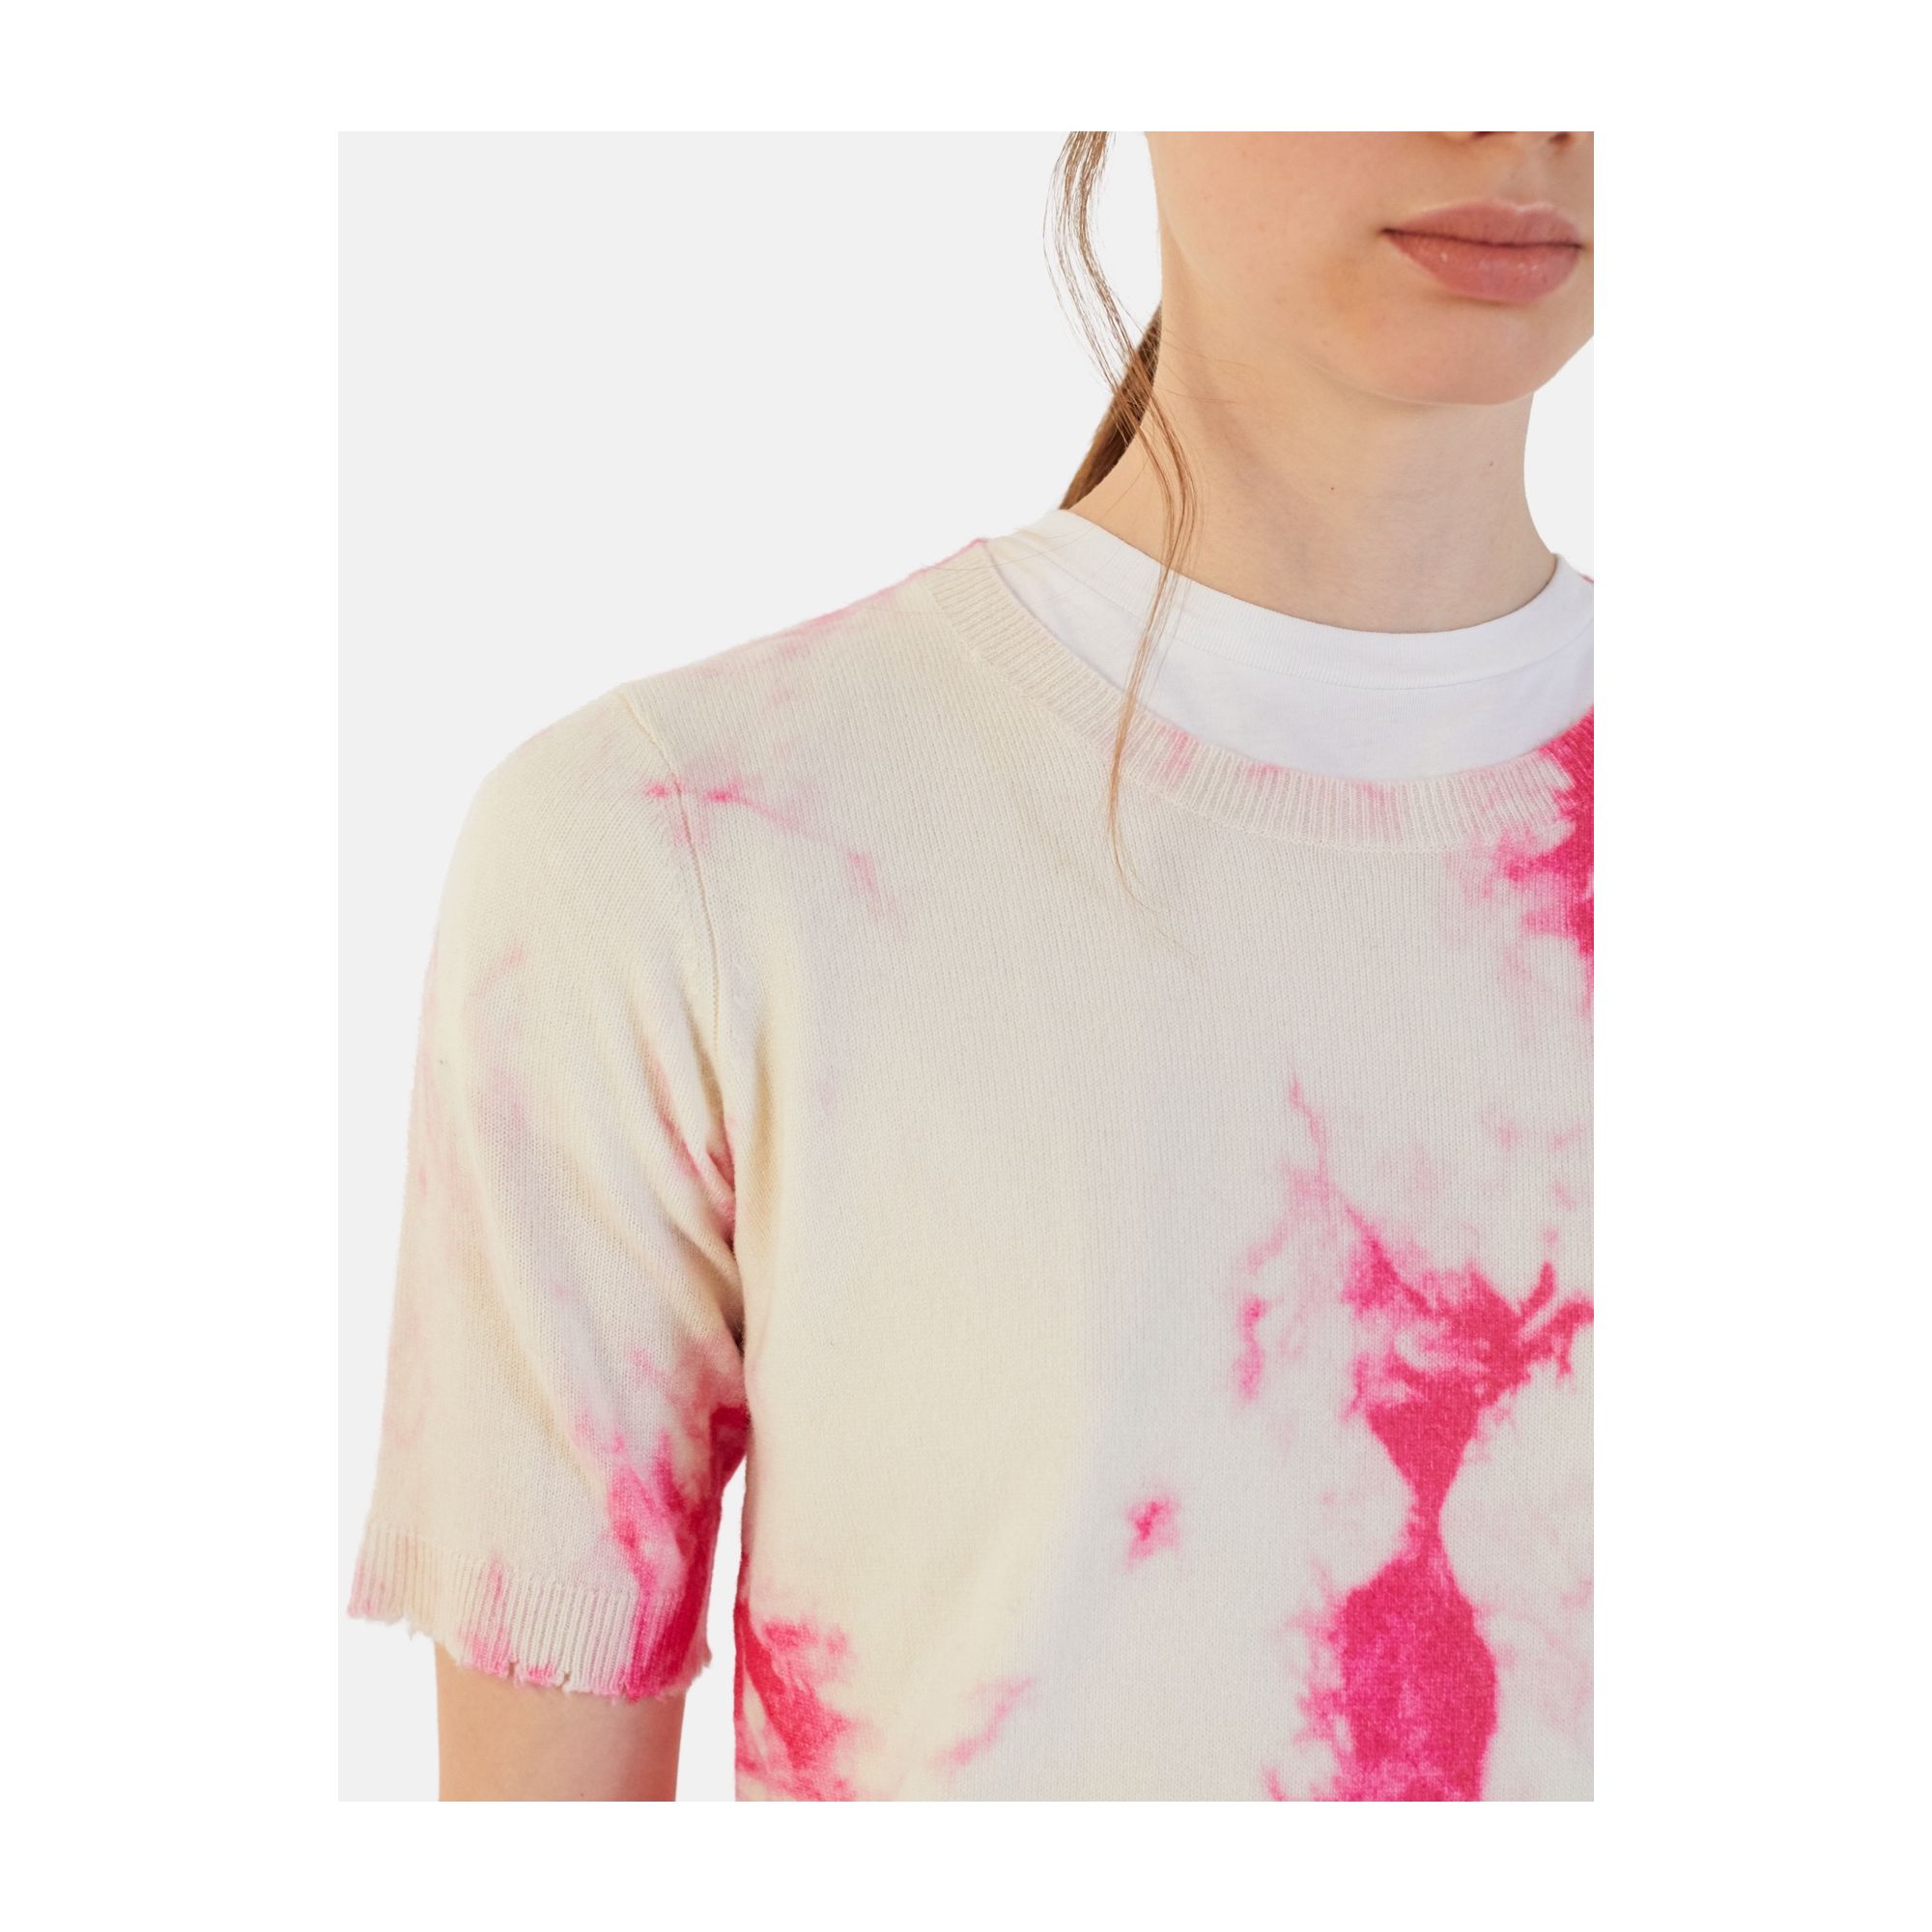 ROUND NECK ALL OVER PRINT S/S 100% CASHMERE FUXIA FLUO